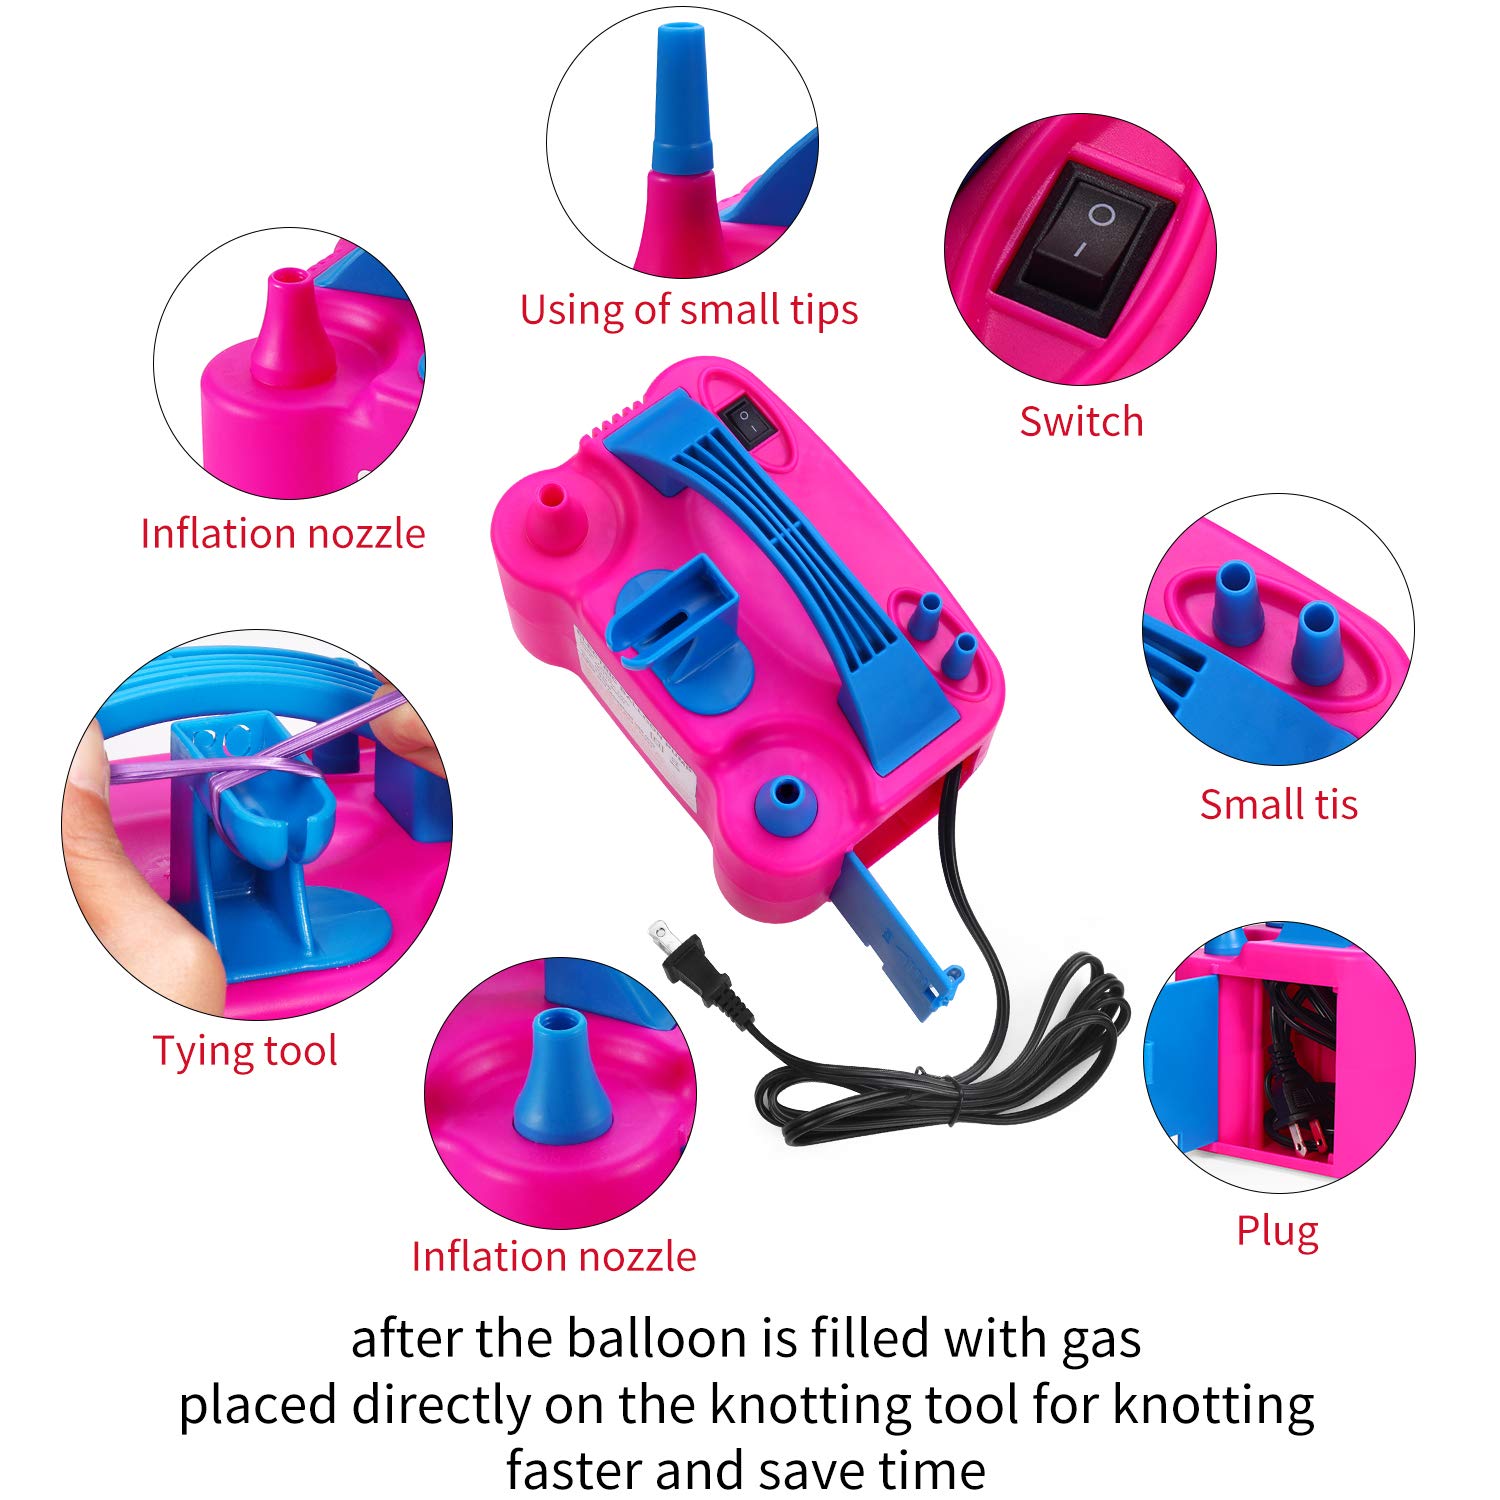 PCFING Electric Air Balloon Pump and Balloon Tying Tool in One, Portable Dual Nozzle Electric Balloon Blower Air Pump Balloons Inflator with Tying Tool on Pump for Decoration, Party and Save Time